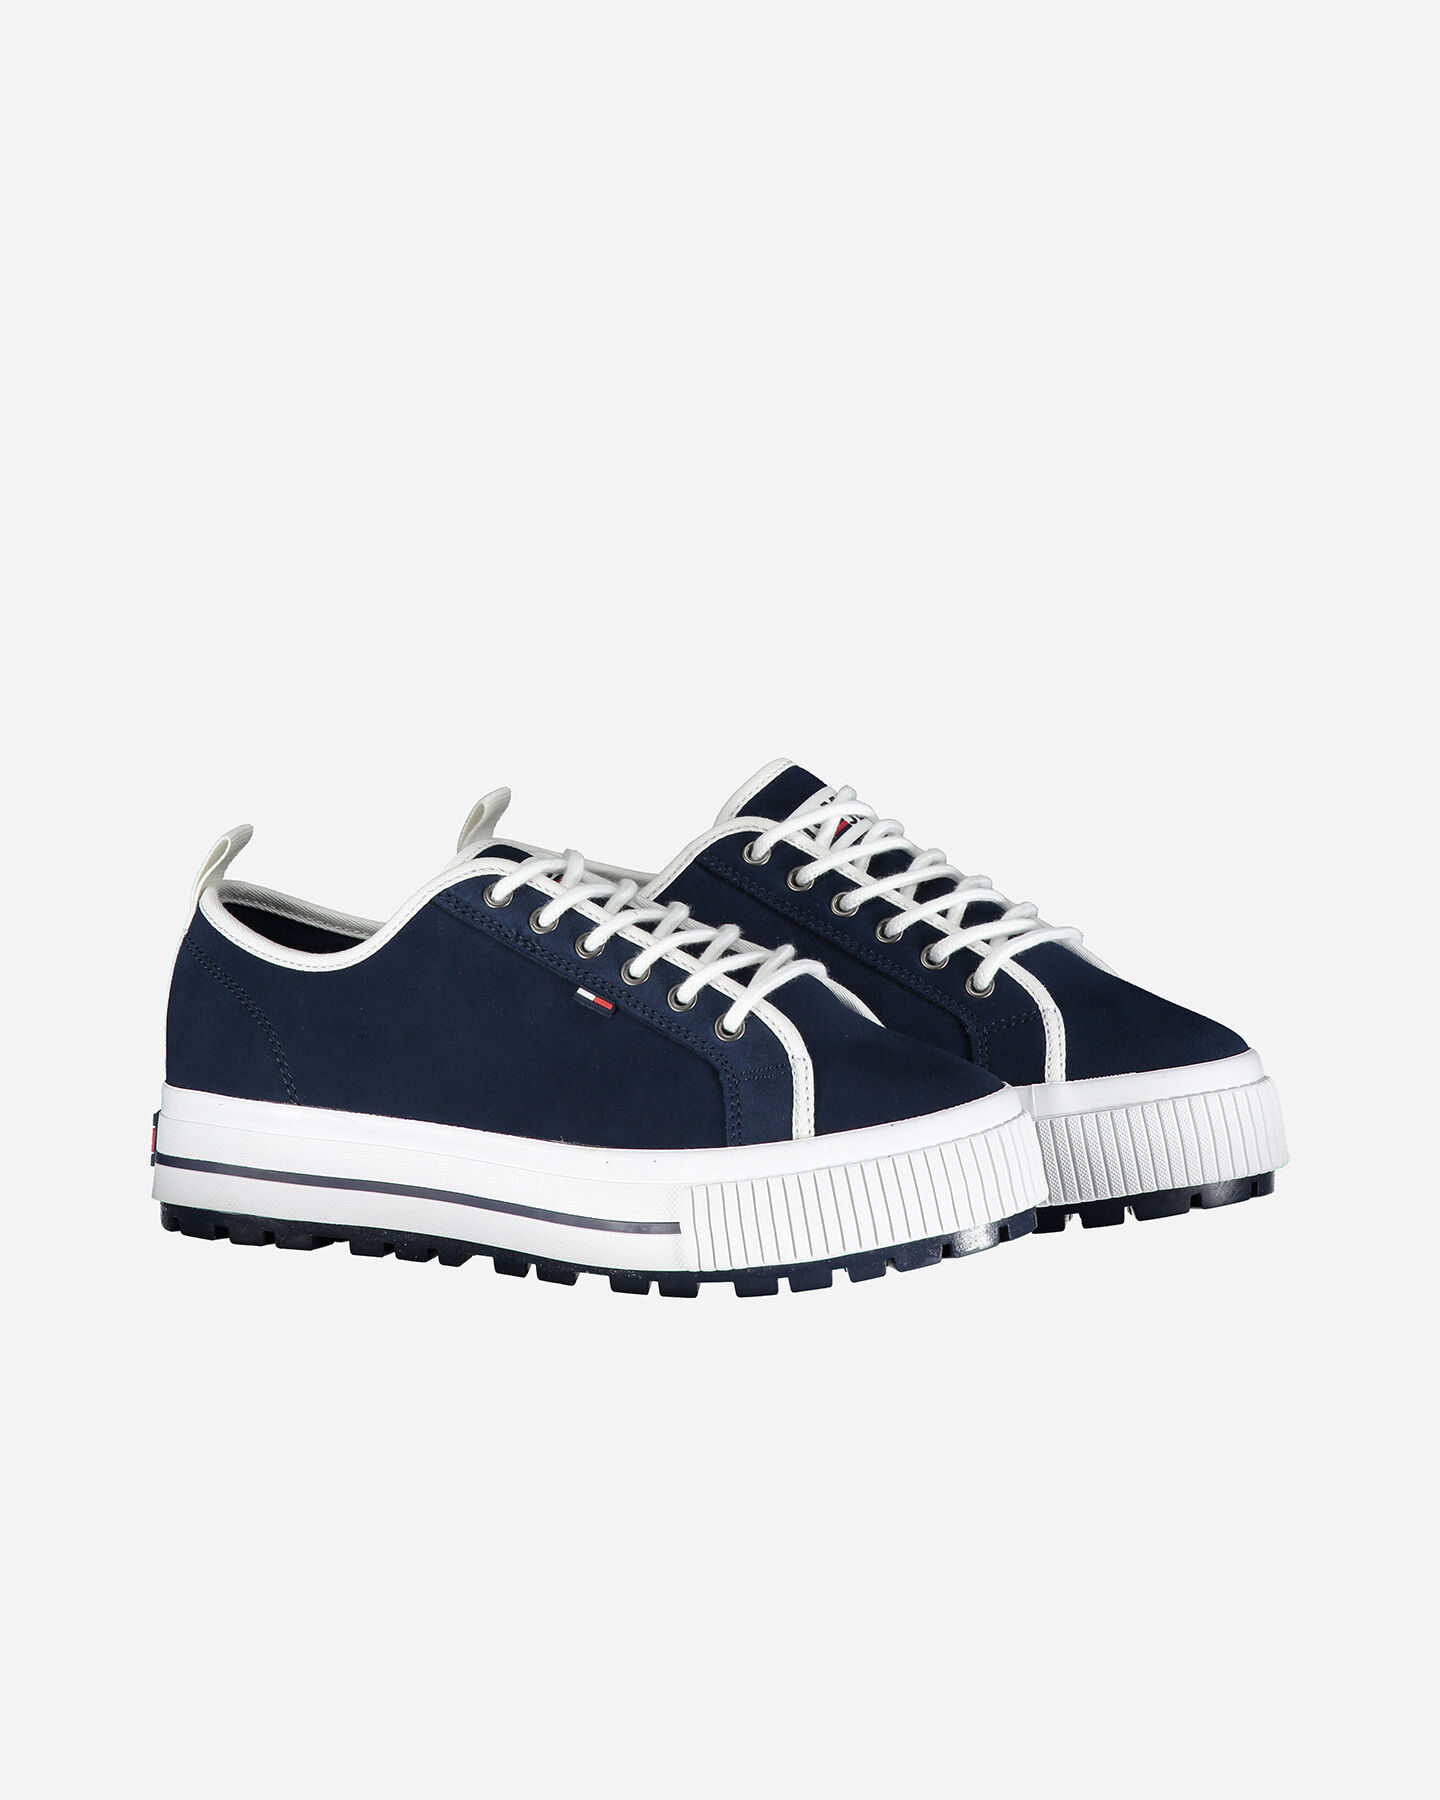  Scarpe sneakers TOMMY HILFIGER CLEATED CITY W S4074058|CBK|36 scatto 1